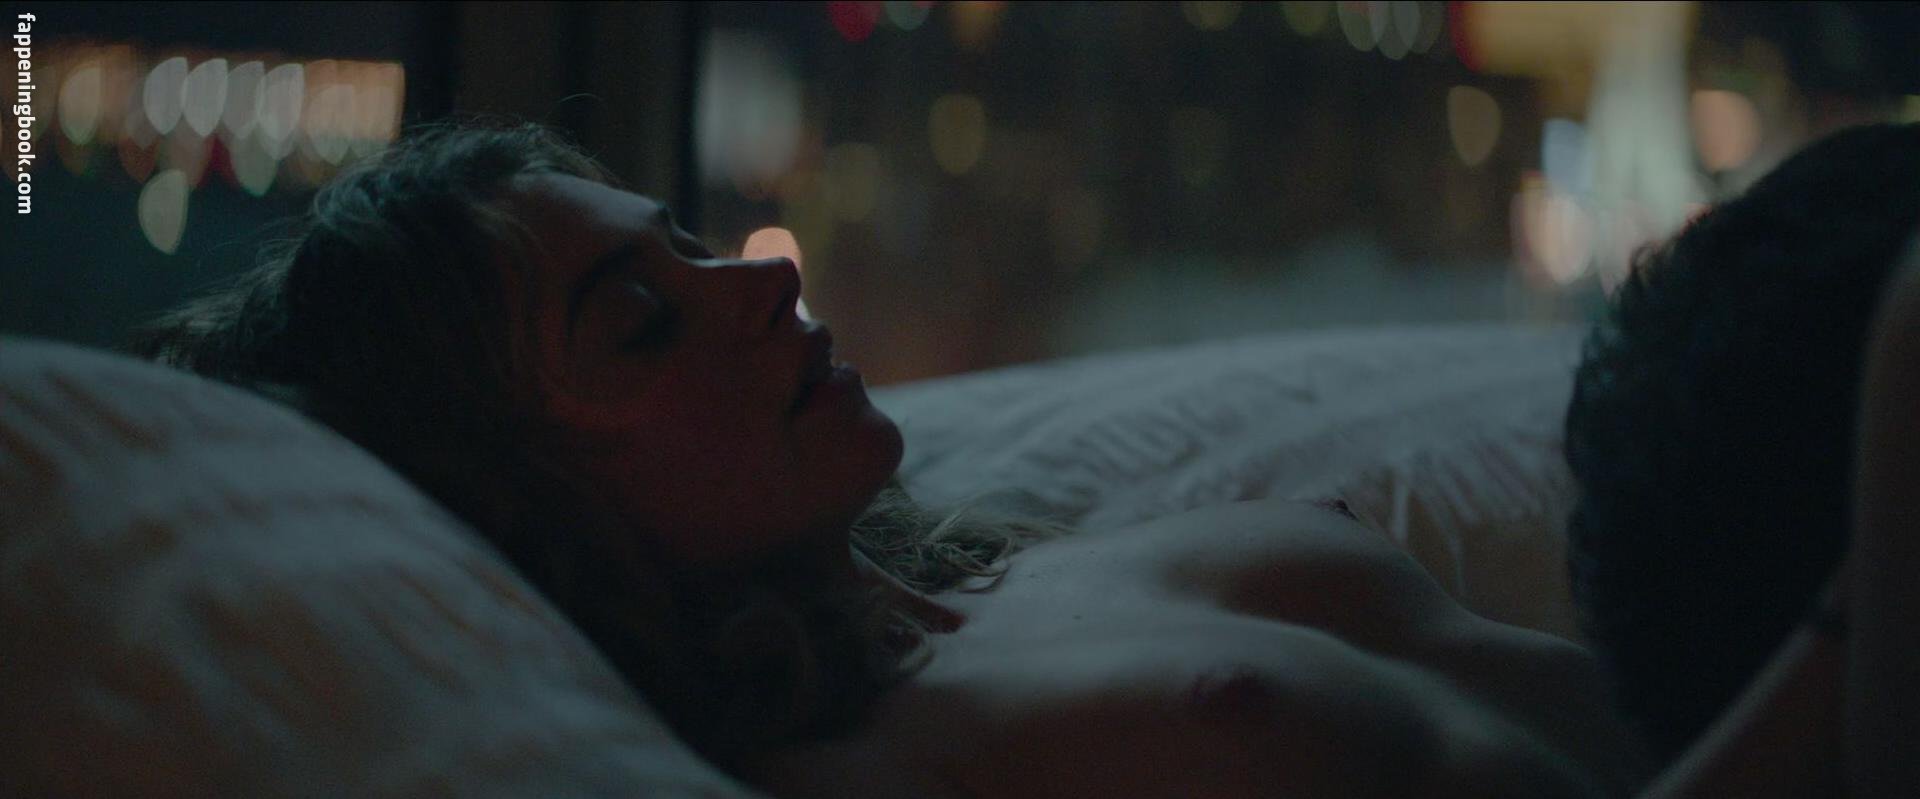 Imogen poots fappening